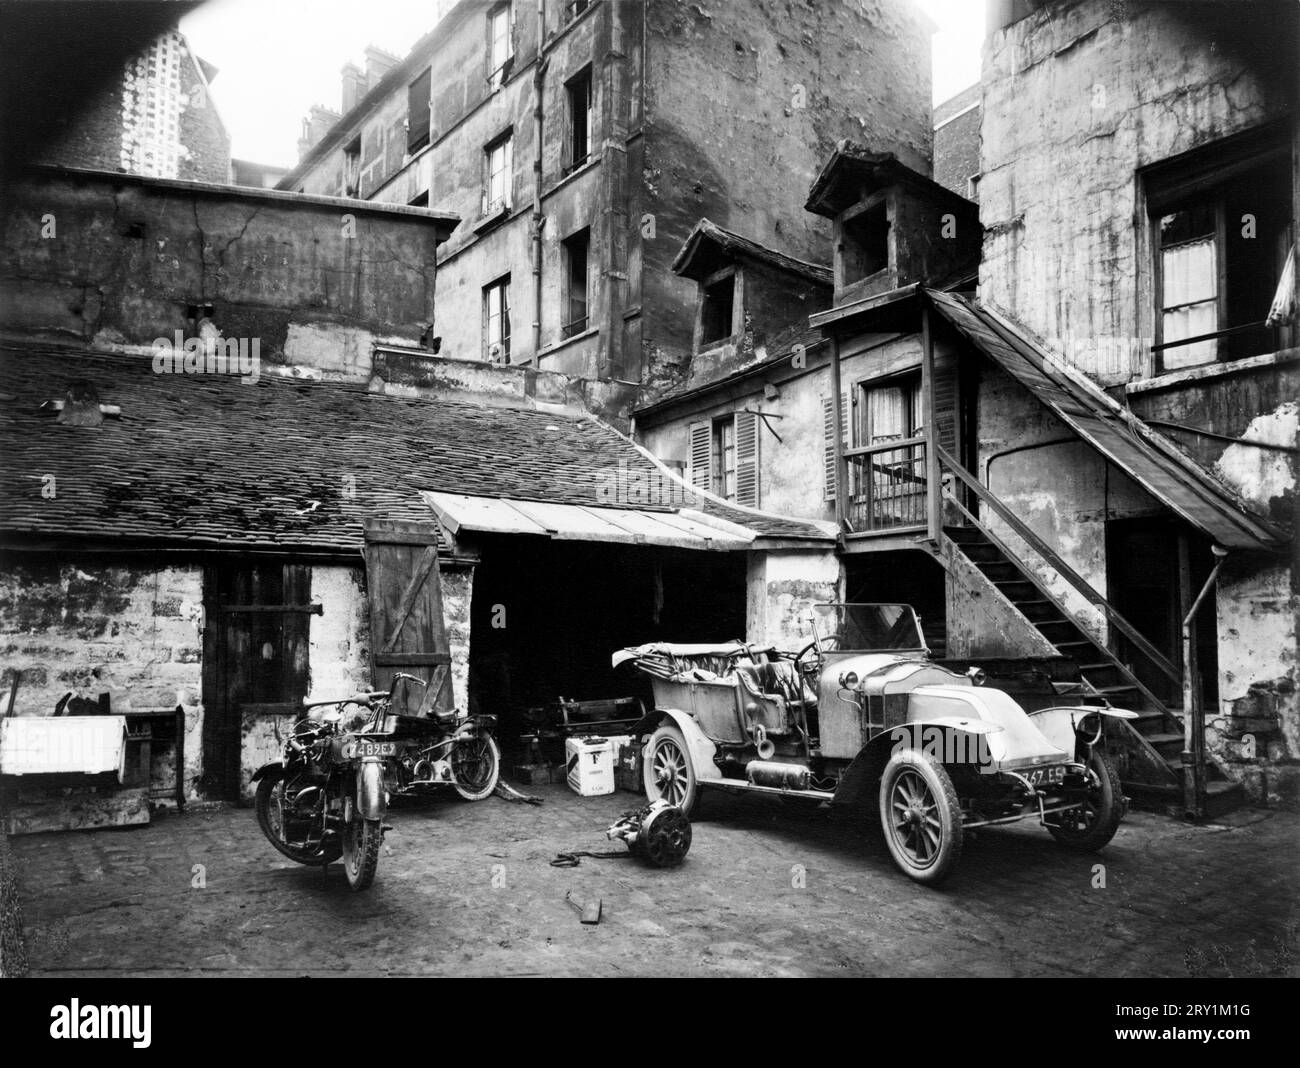 Eugène Atget: Cour, Rue de Valence, Paris, ca. 1920  Eugène Atget: cour, Rue de Valence, undated photograph, ca. 1920  Automobile and two motorcycles in front of garage in a courtyard, 5e Arrondissement, Paris, France Stock Photo